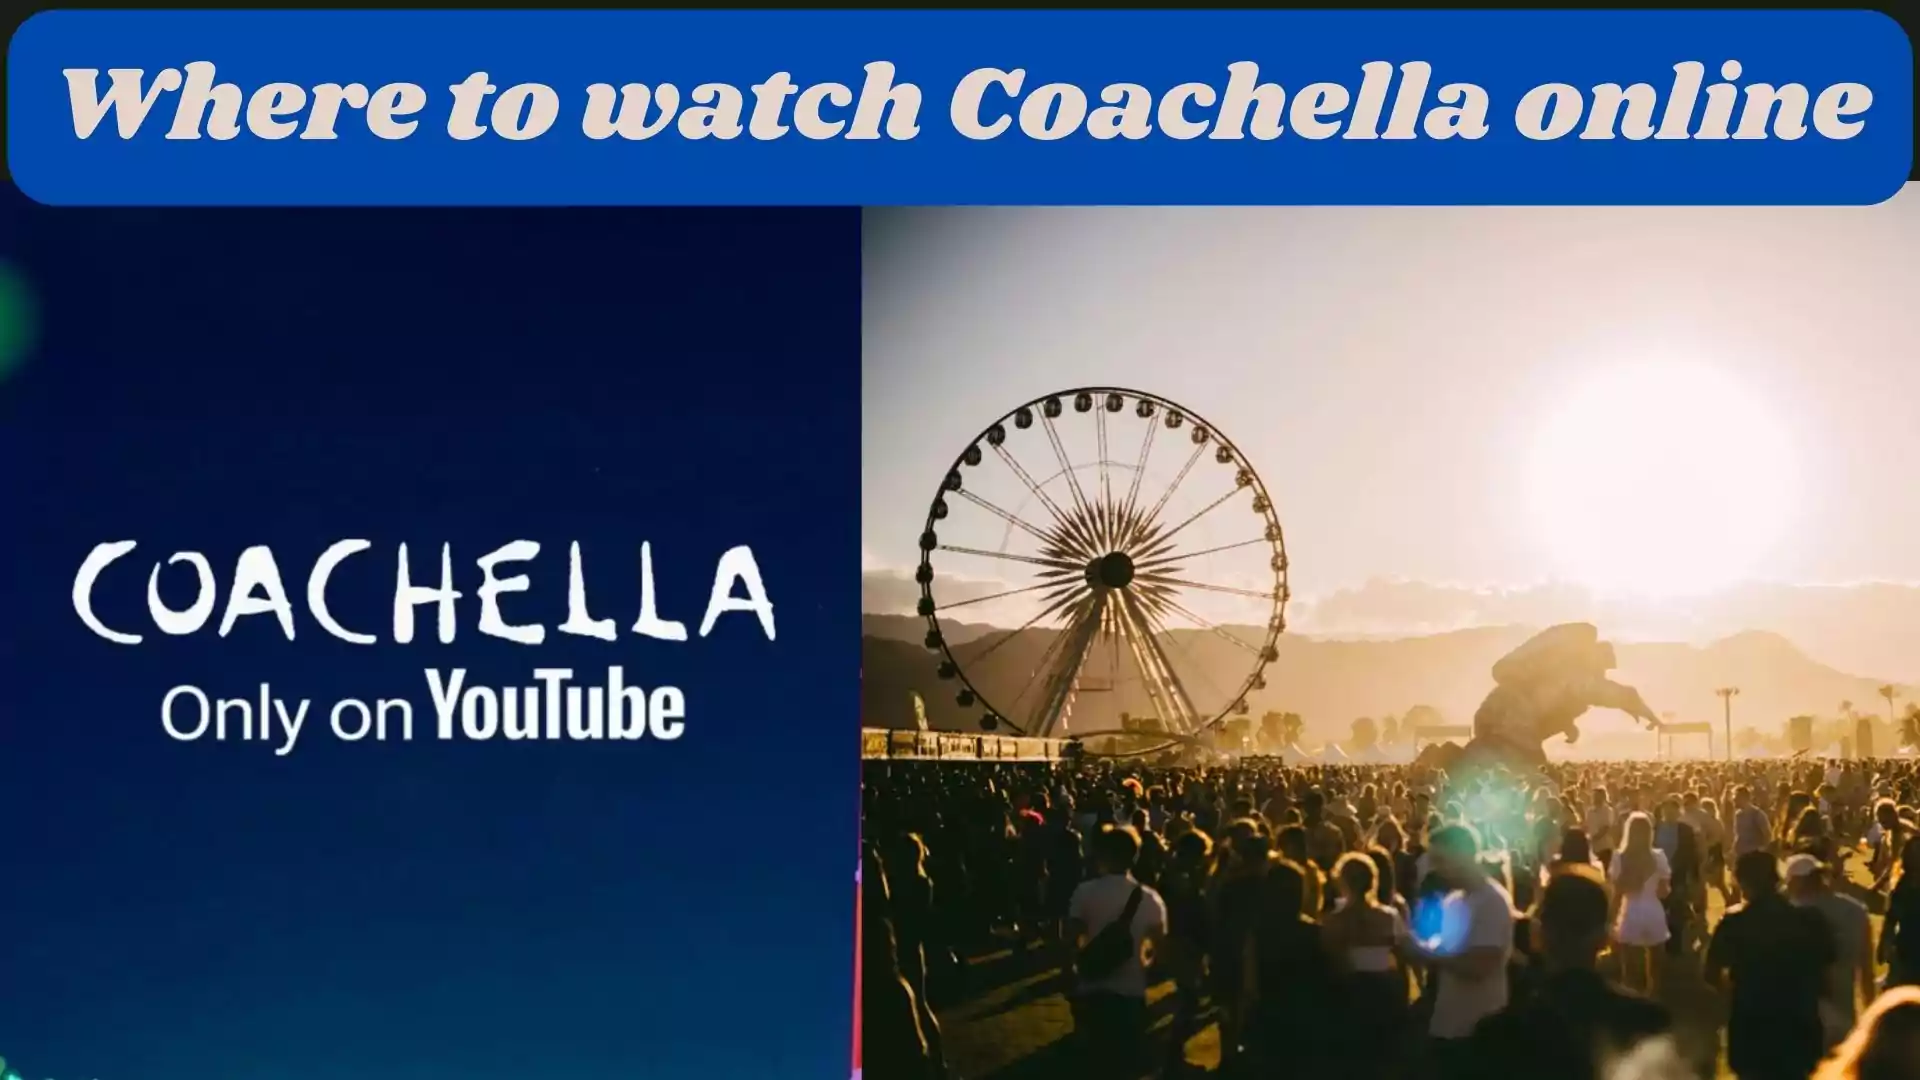 Where to watch Coachella online wallpaper and images